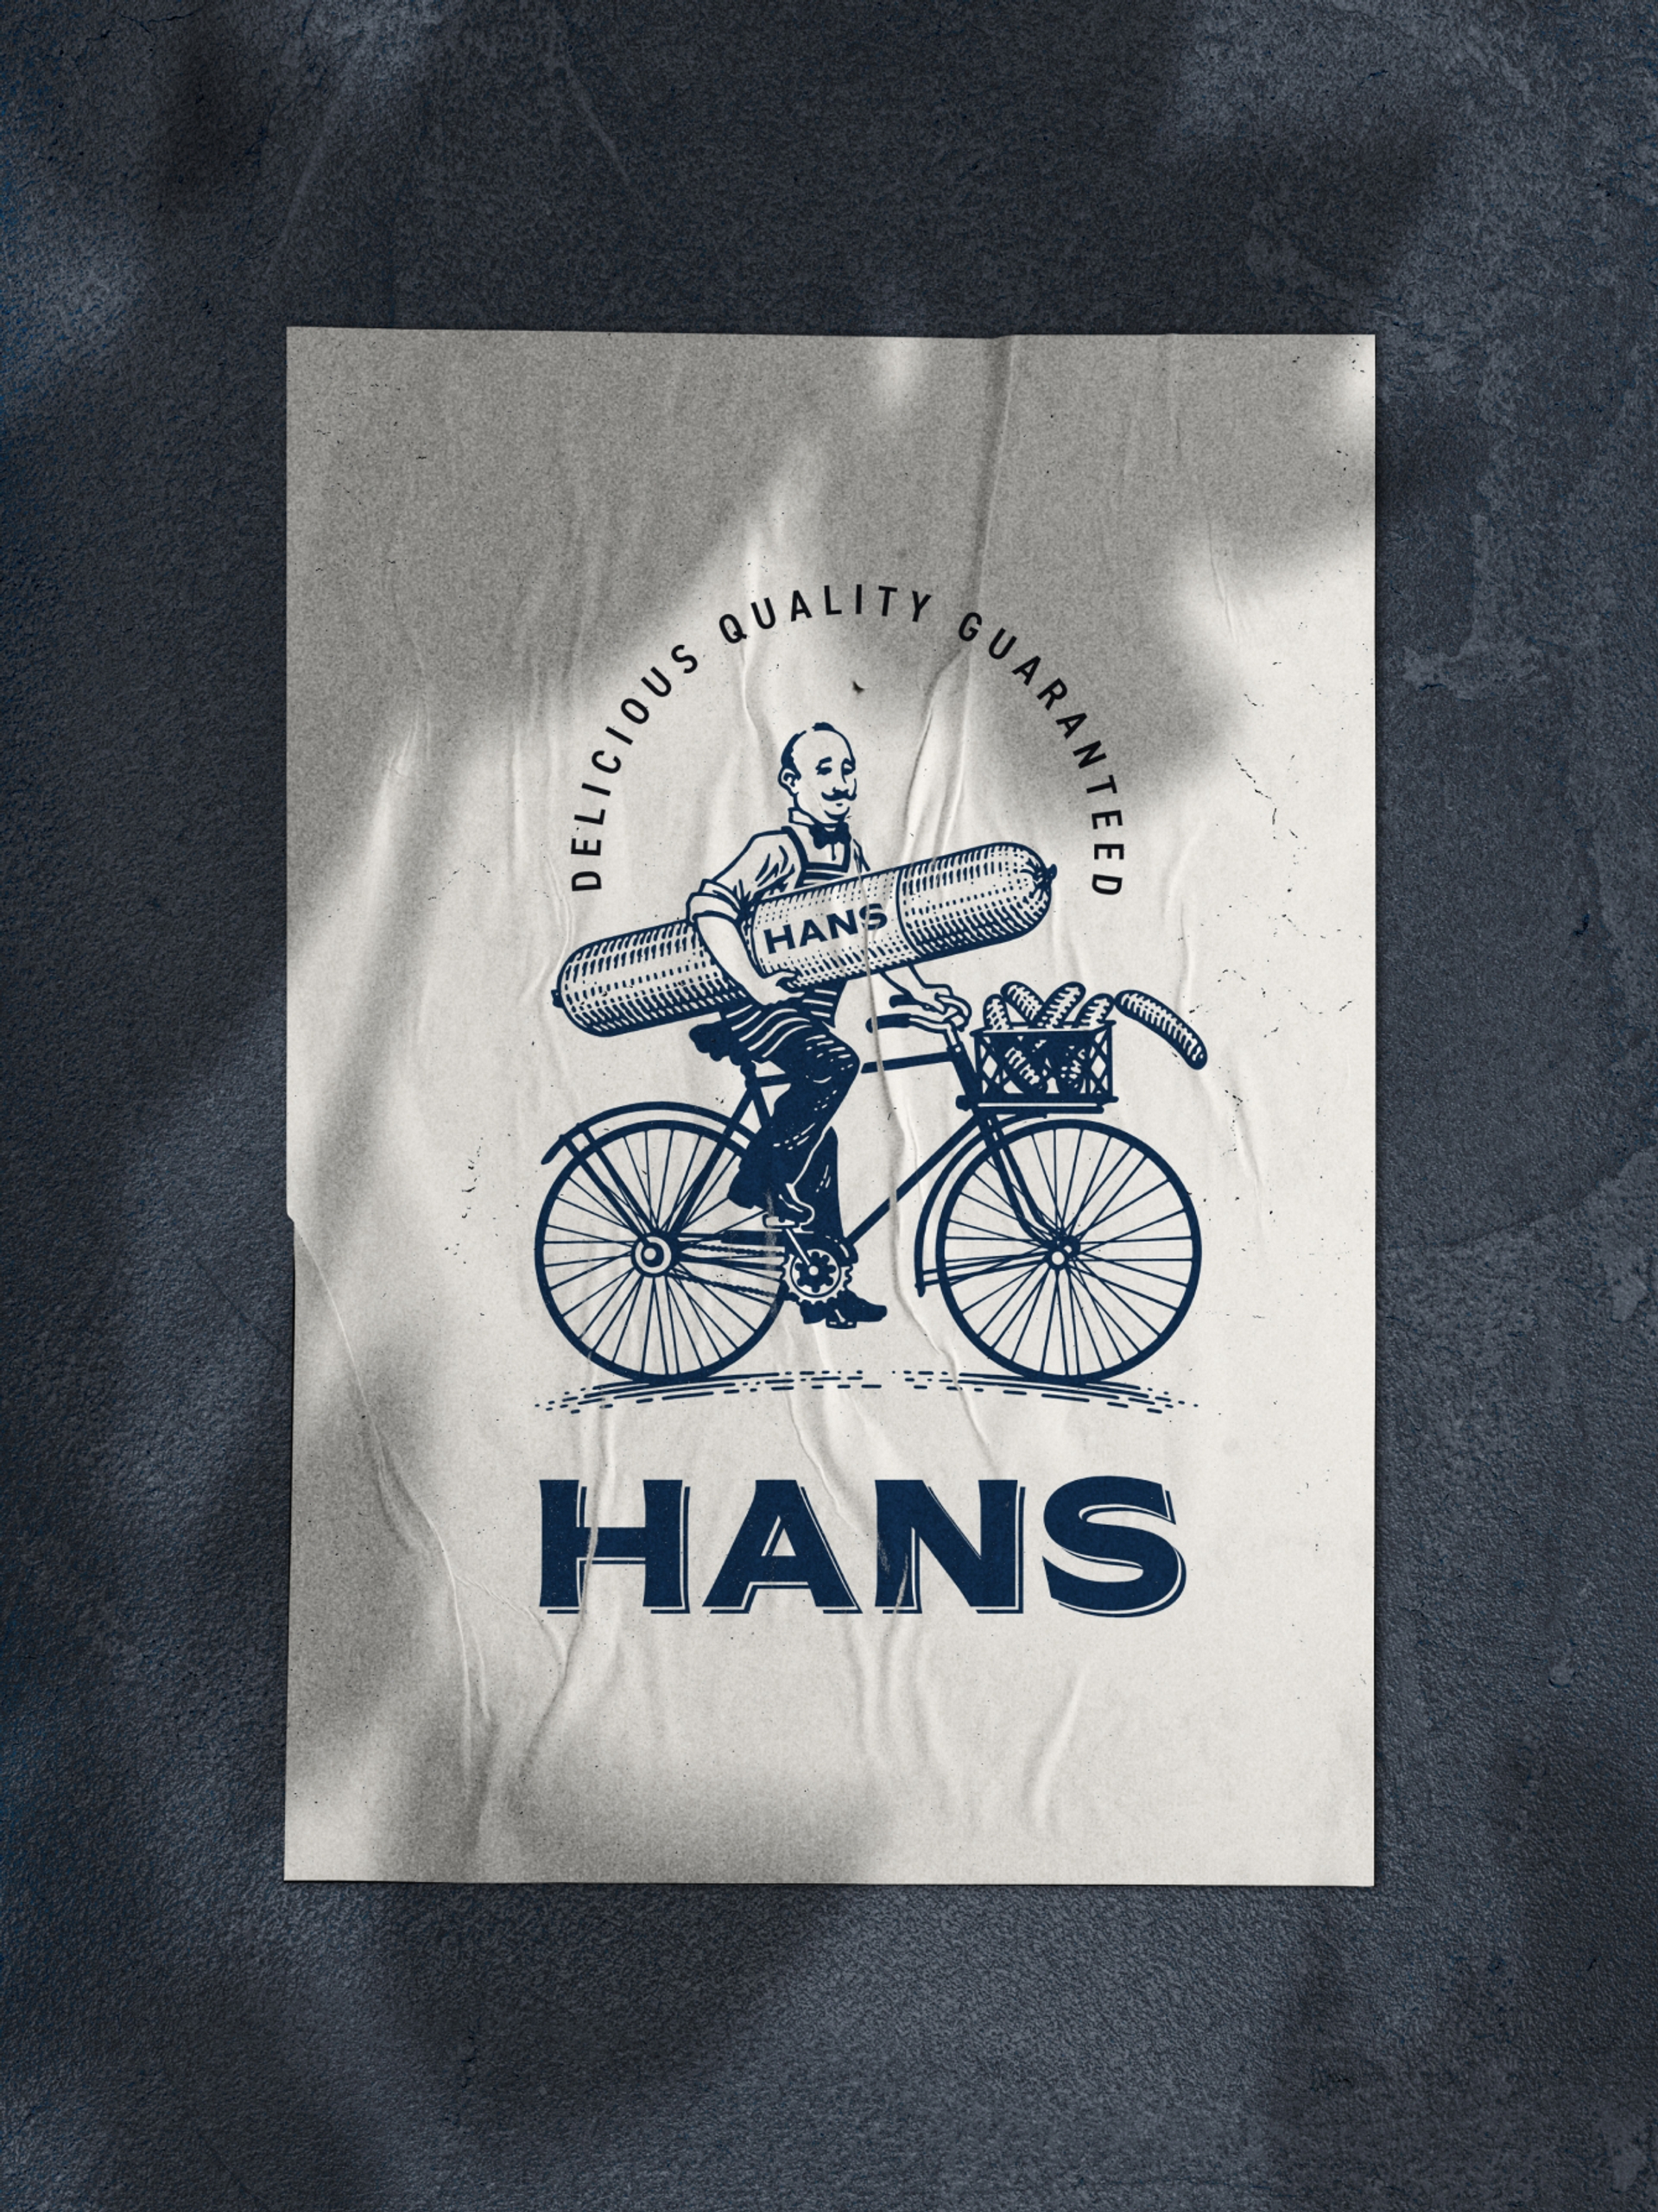 Textured retro portrait poster design by brand design agency Our Revolution, featuring navy Hans logo and ink illustration of a man on a bicycle